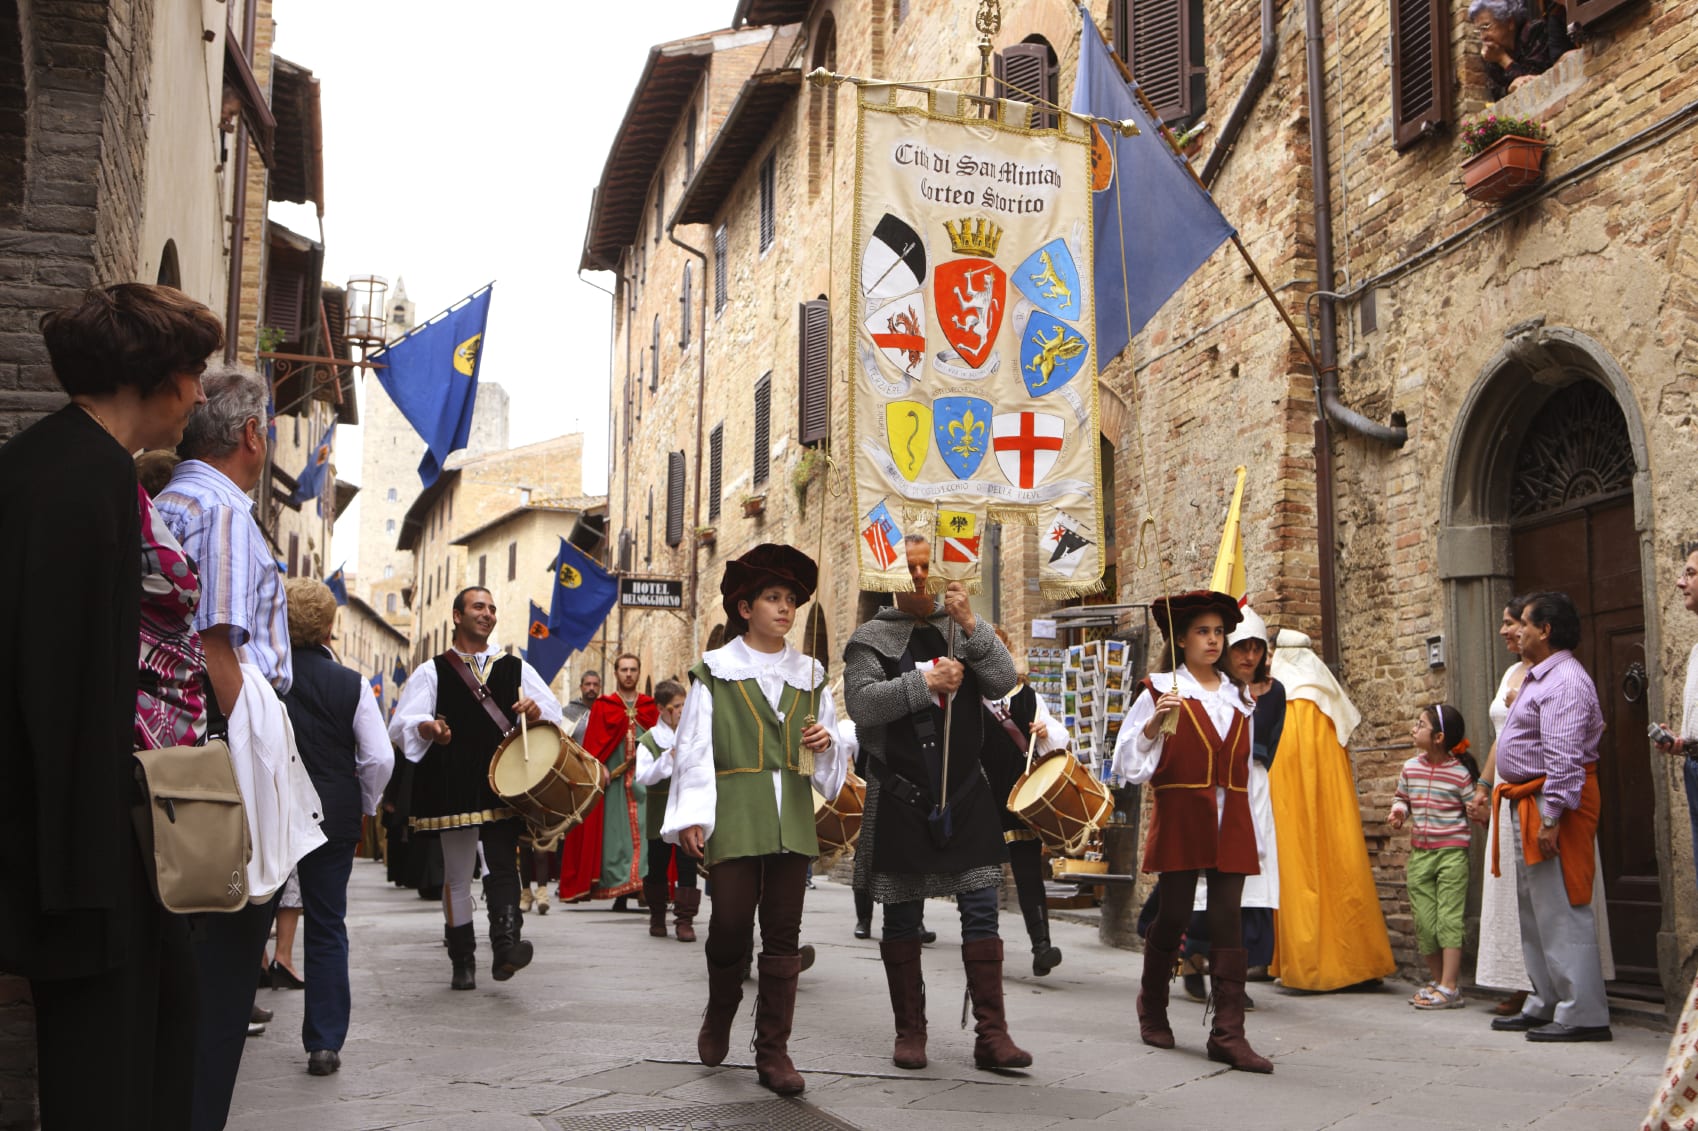 San Gimignano medieval festival, an event in Italy in June